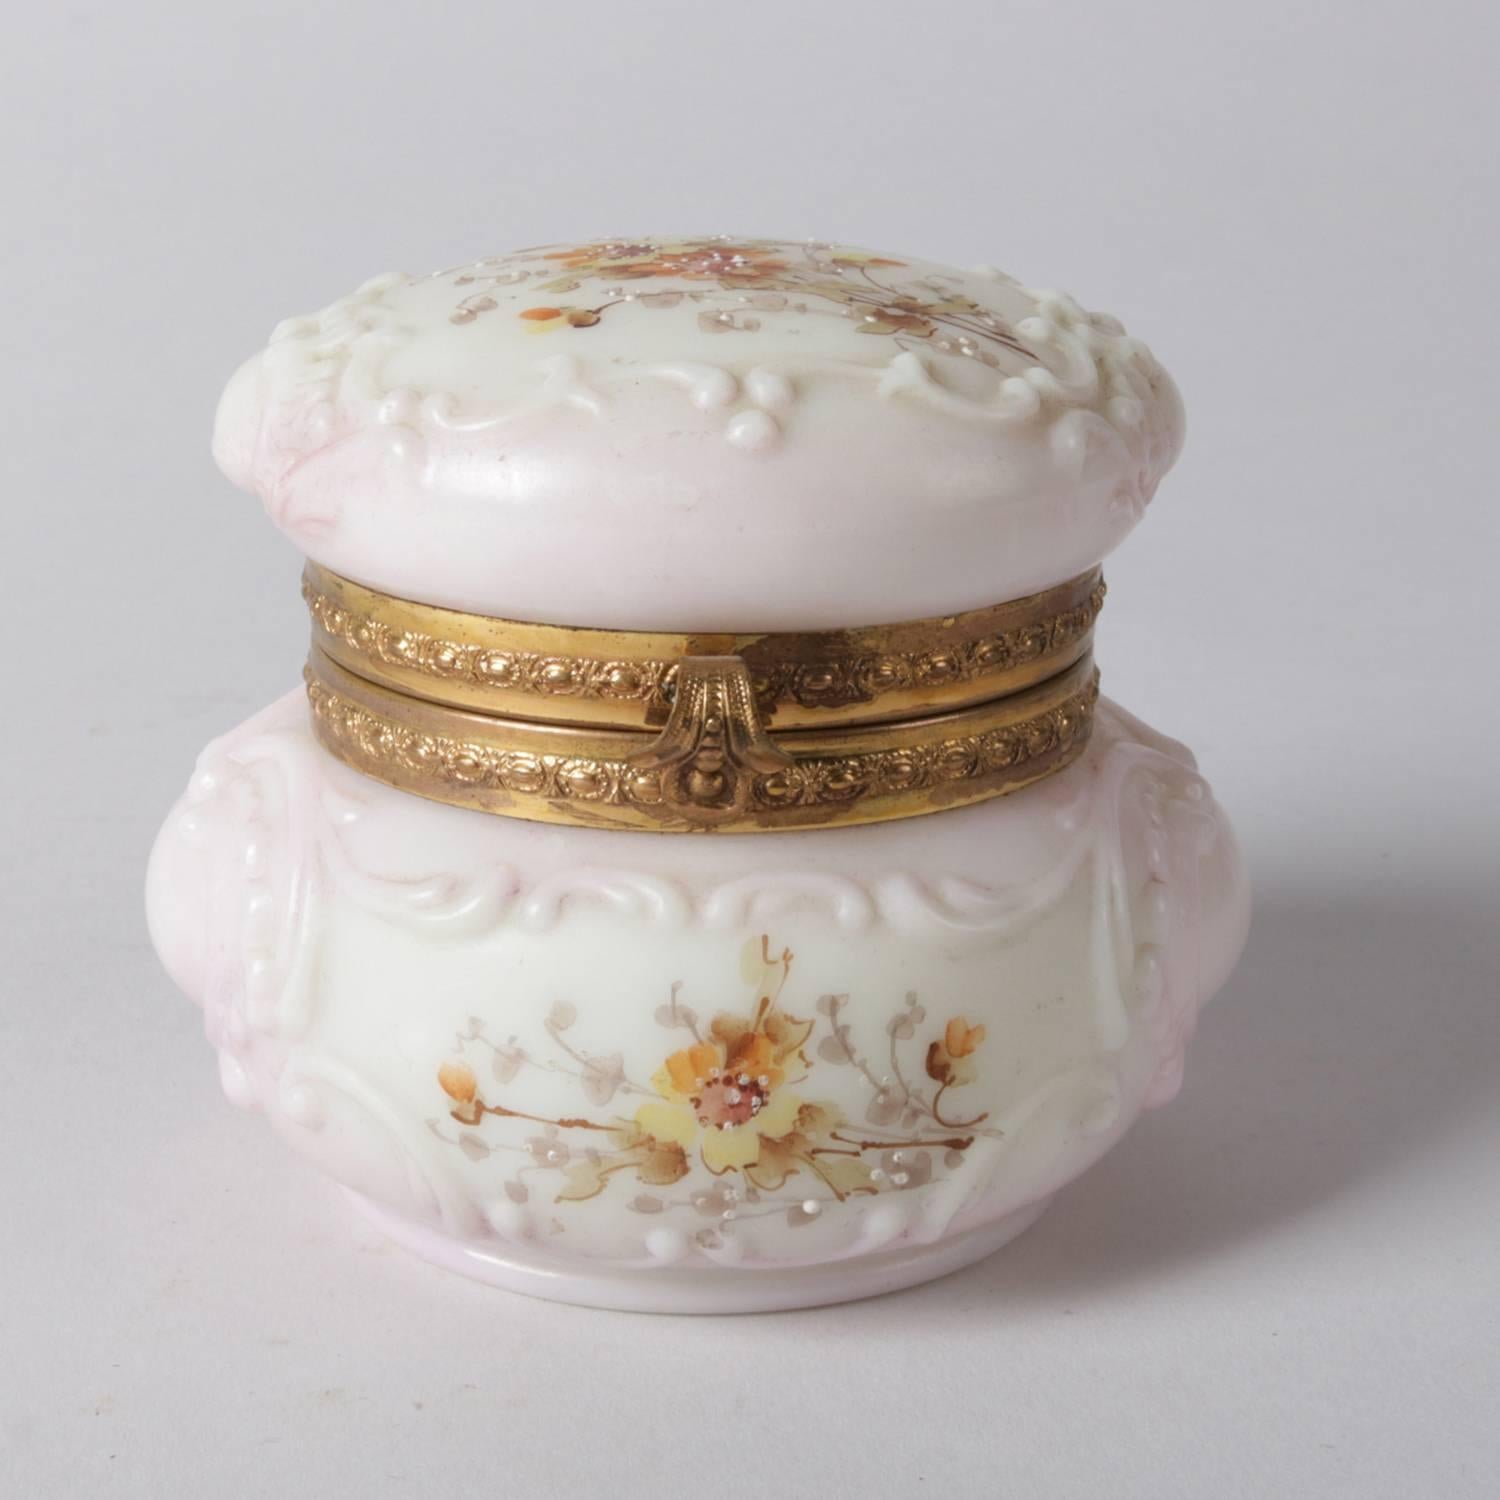 Antique Wavecrest opaque pink art glass dresser box features embossed scroll decoration with hand painted enamel flowers and gilt mounts, stamp on base, 19th century

Measures: 3.5